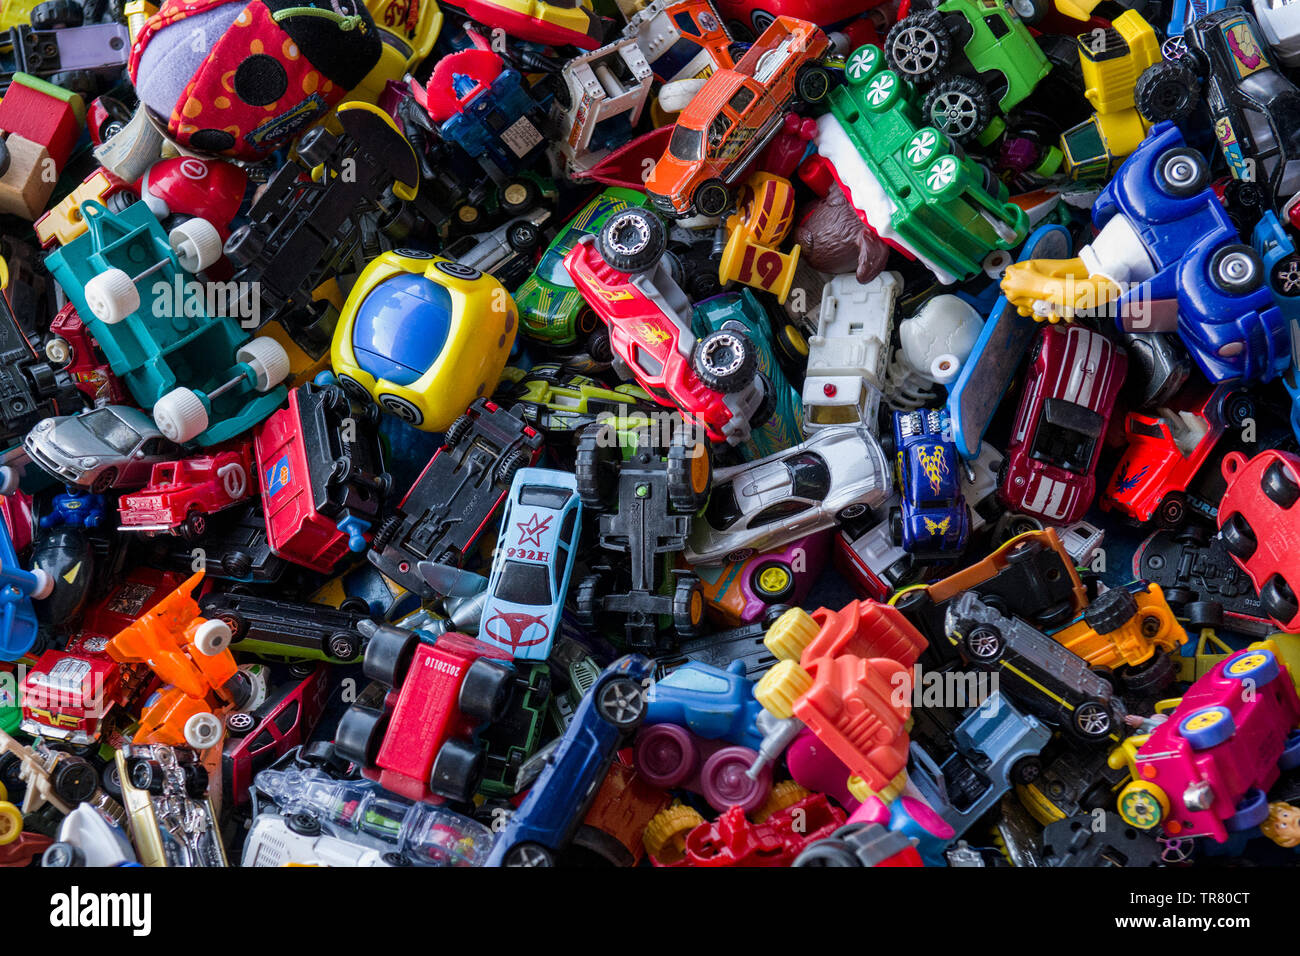 Jumbled pile of small toy cars Stock Photo